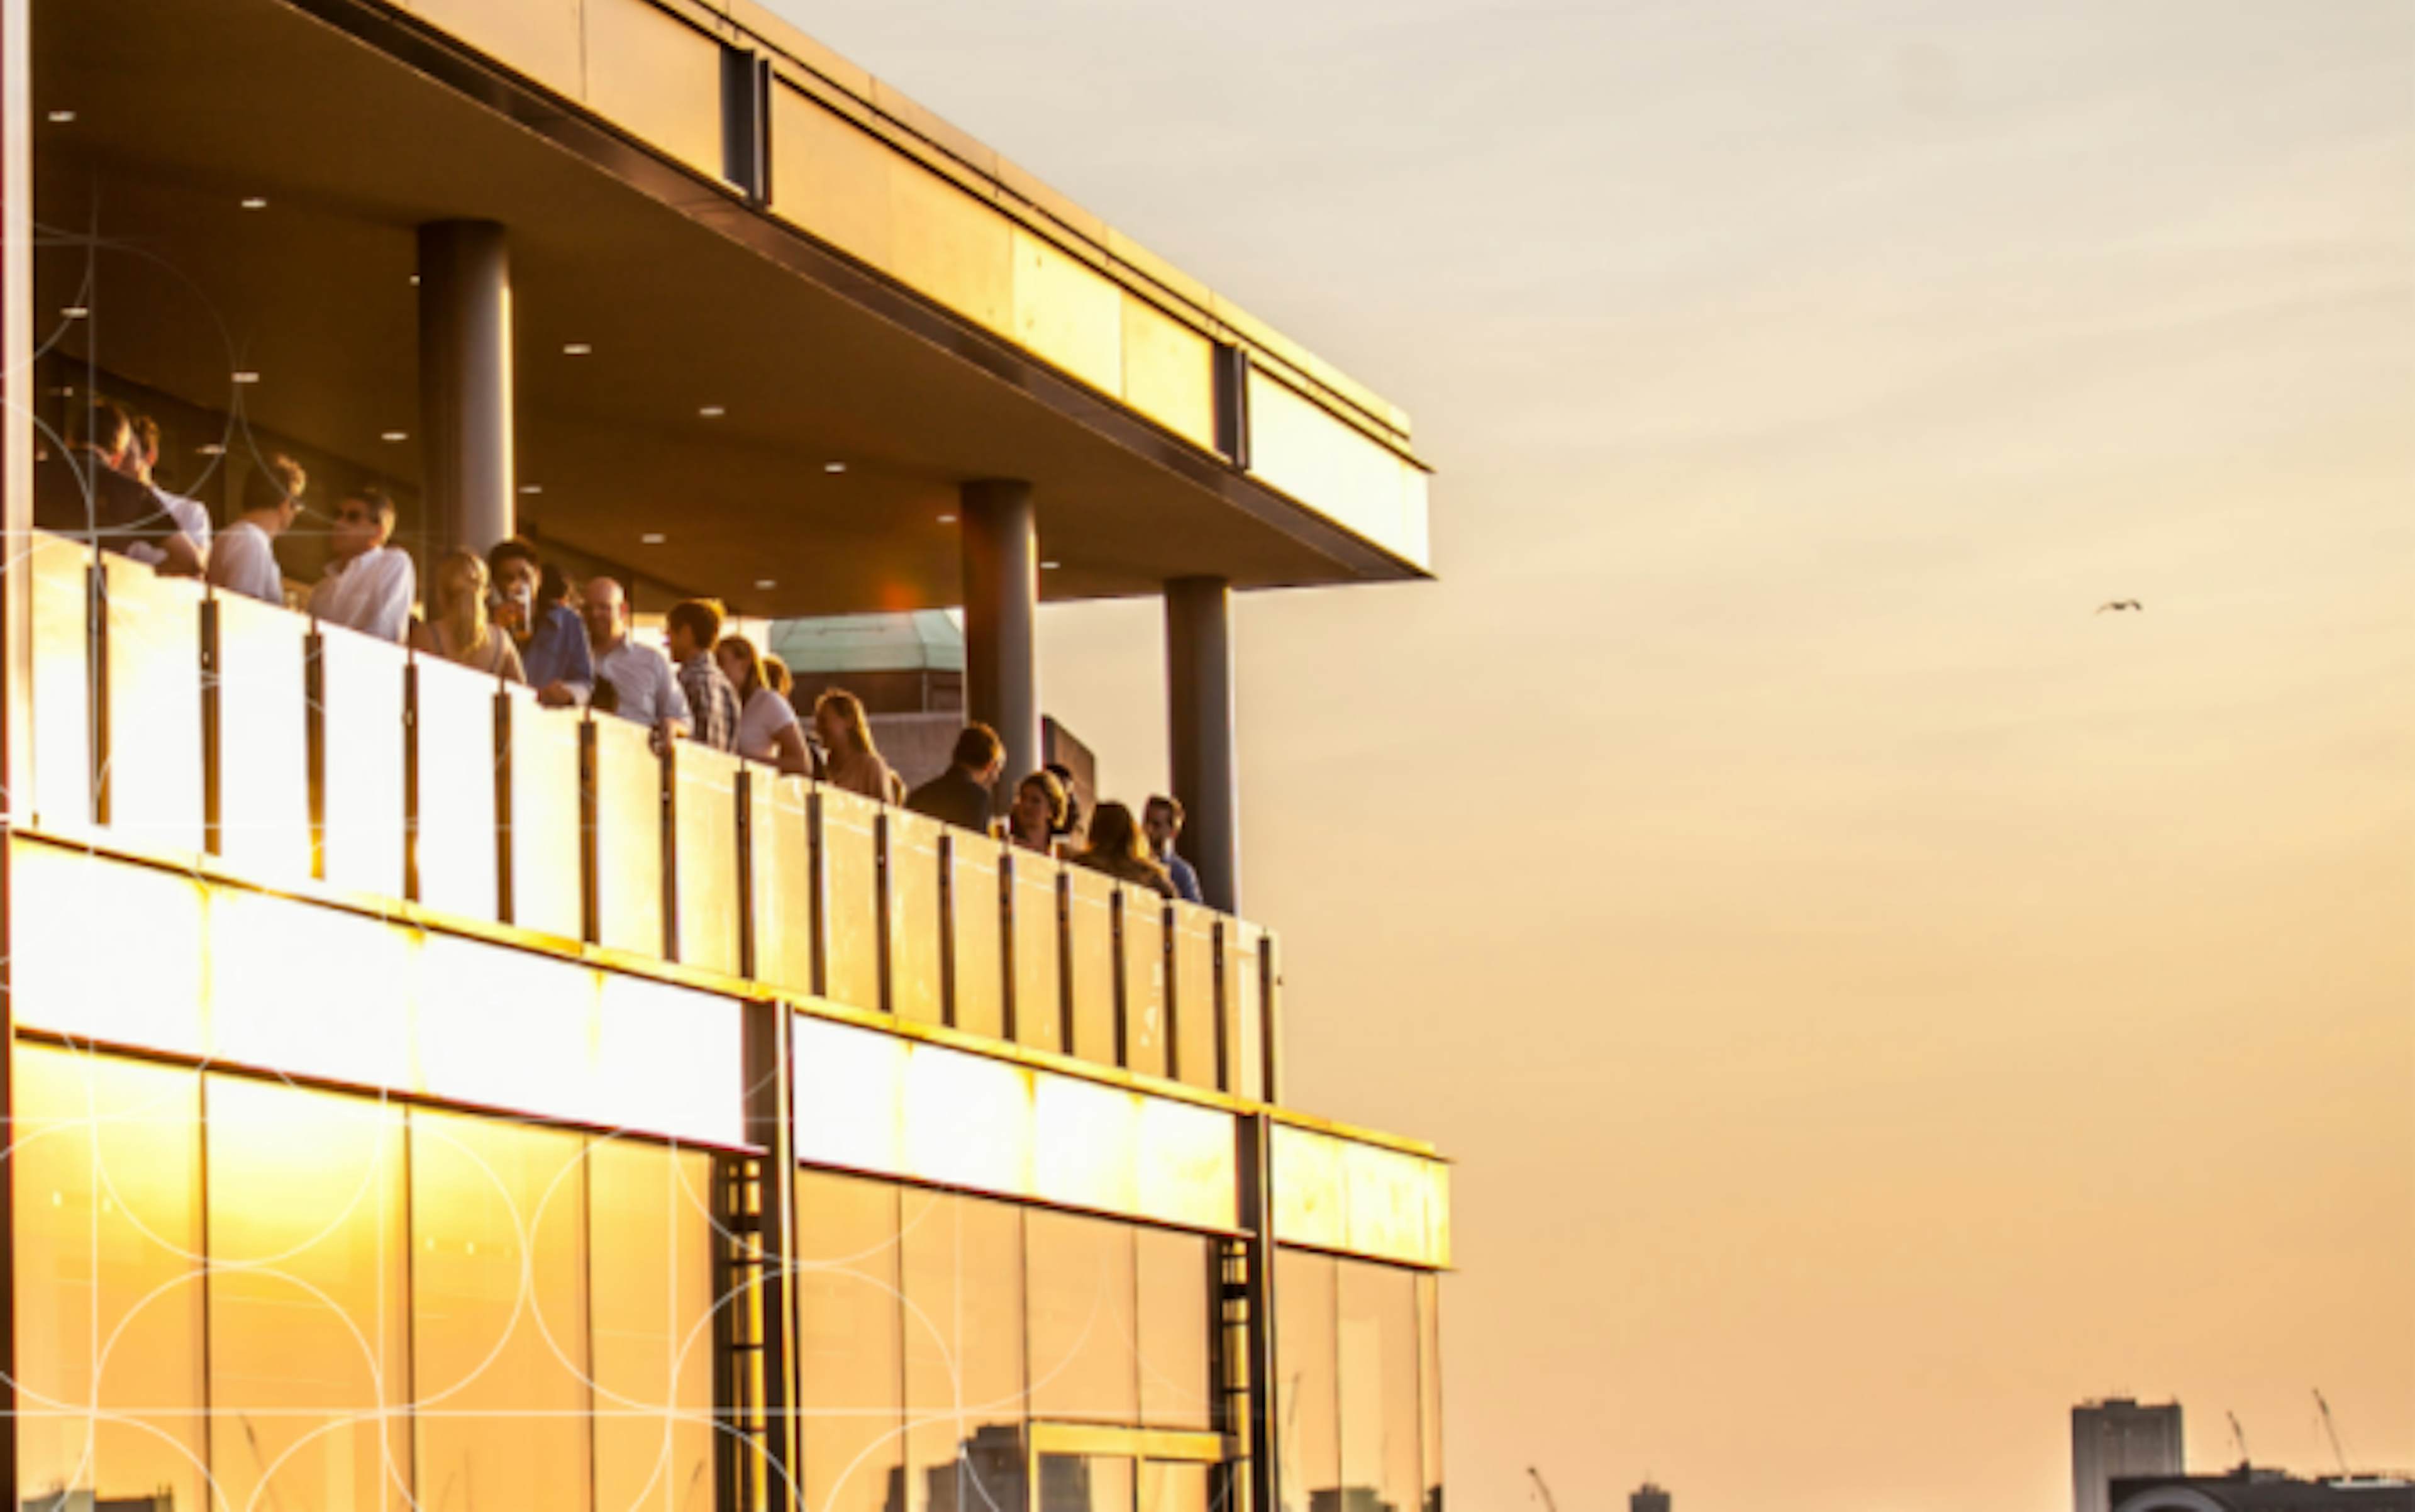 Sea Containers Events - Sunset image 1